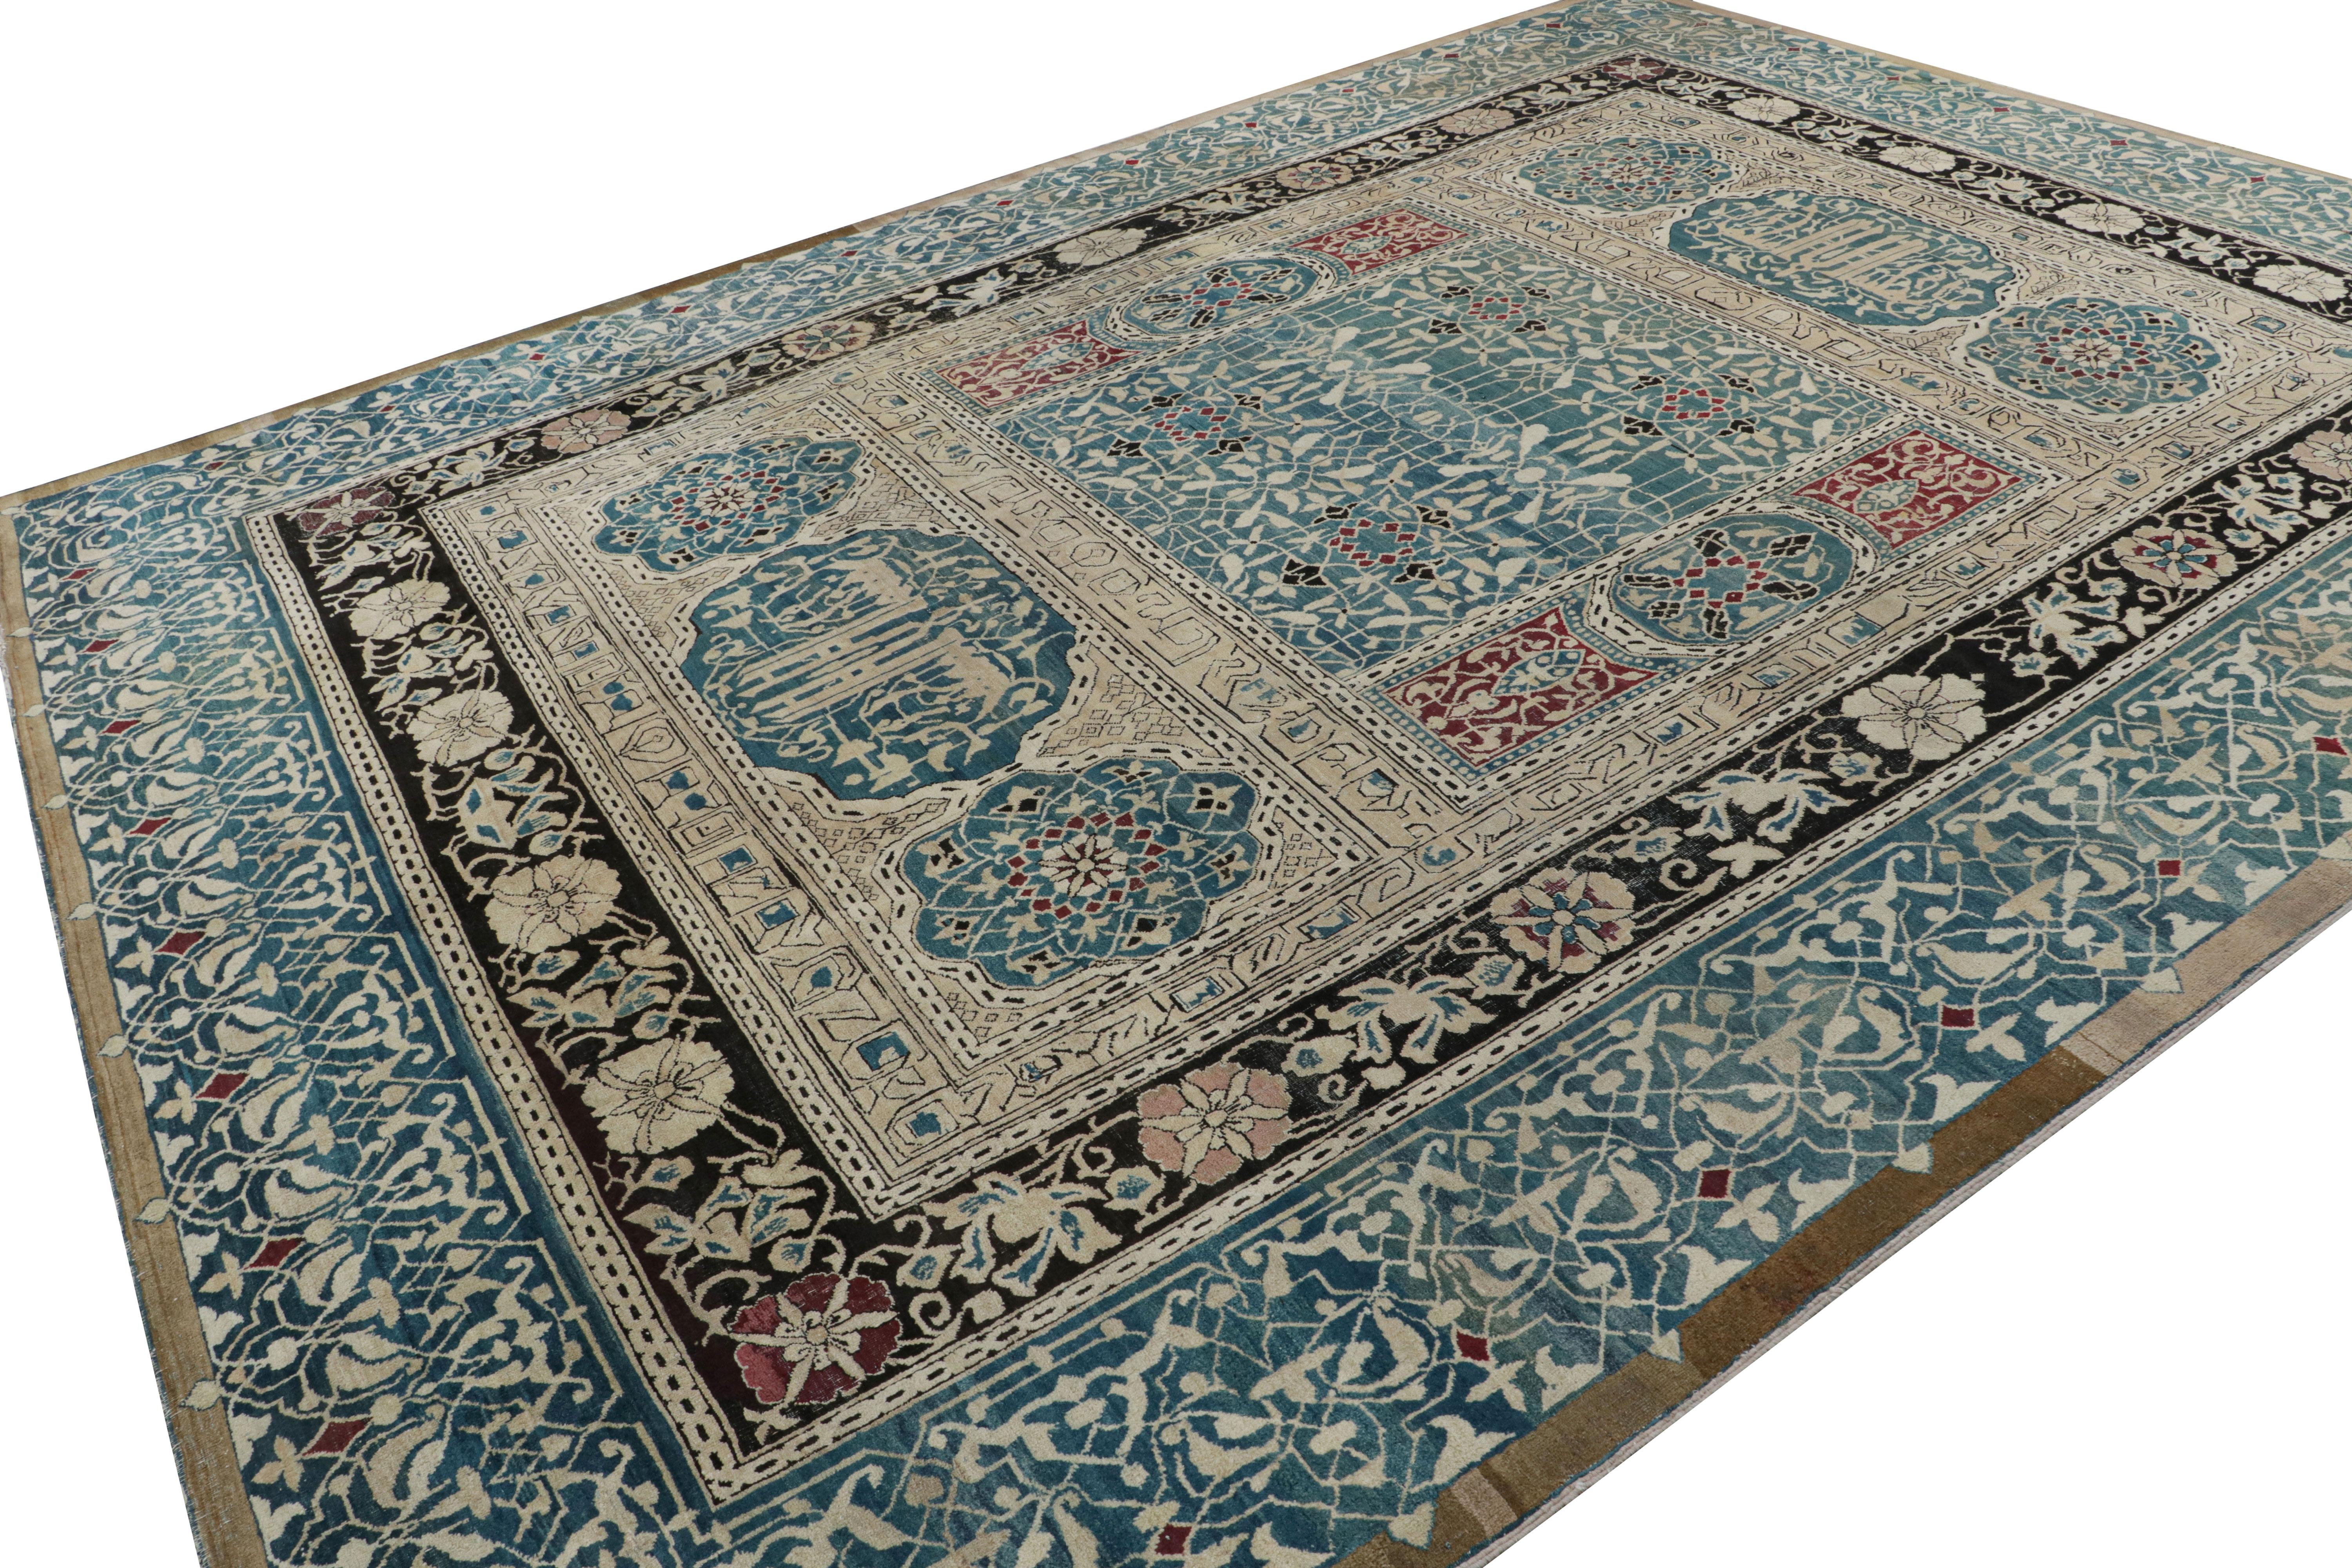 Hand-Knotted Antique Agra Rug in Beige and Teal with Floral Patterns For Sale